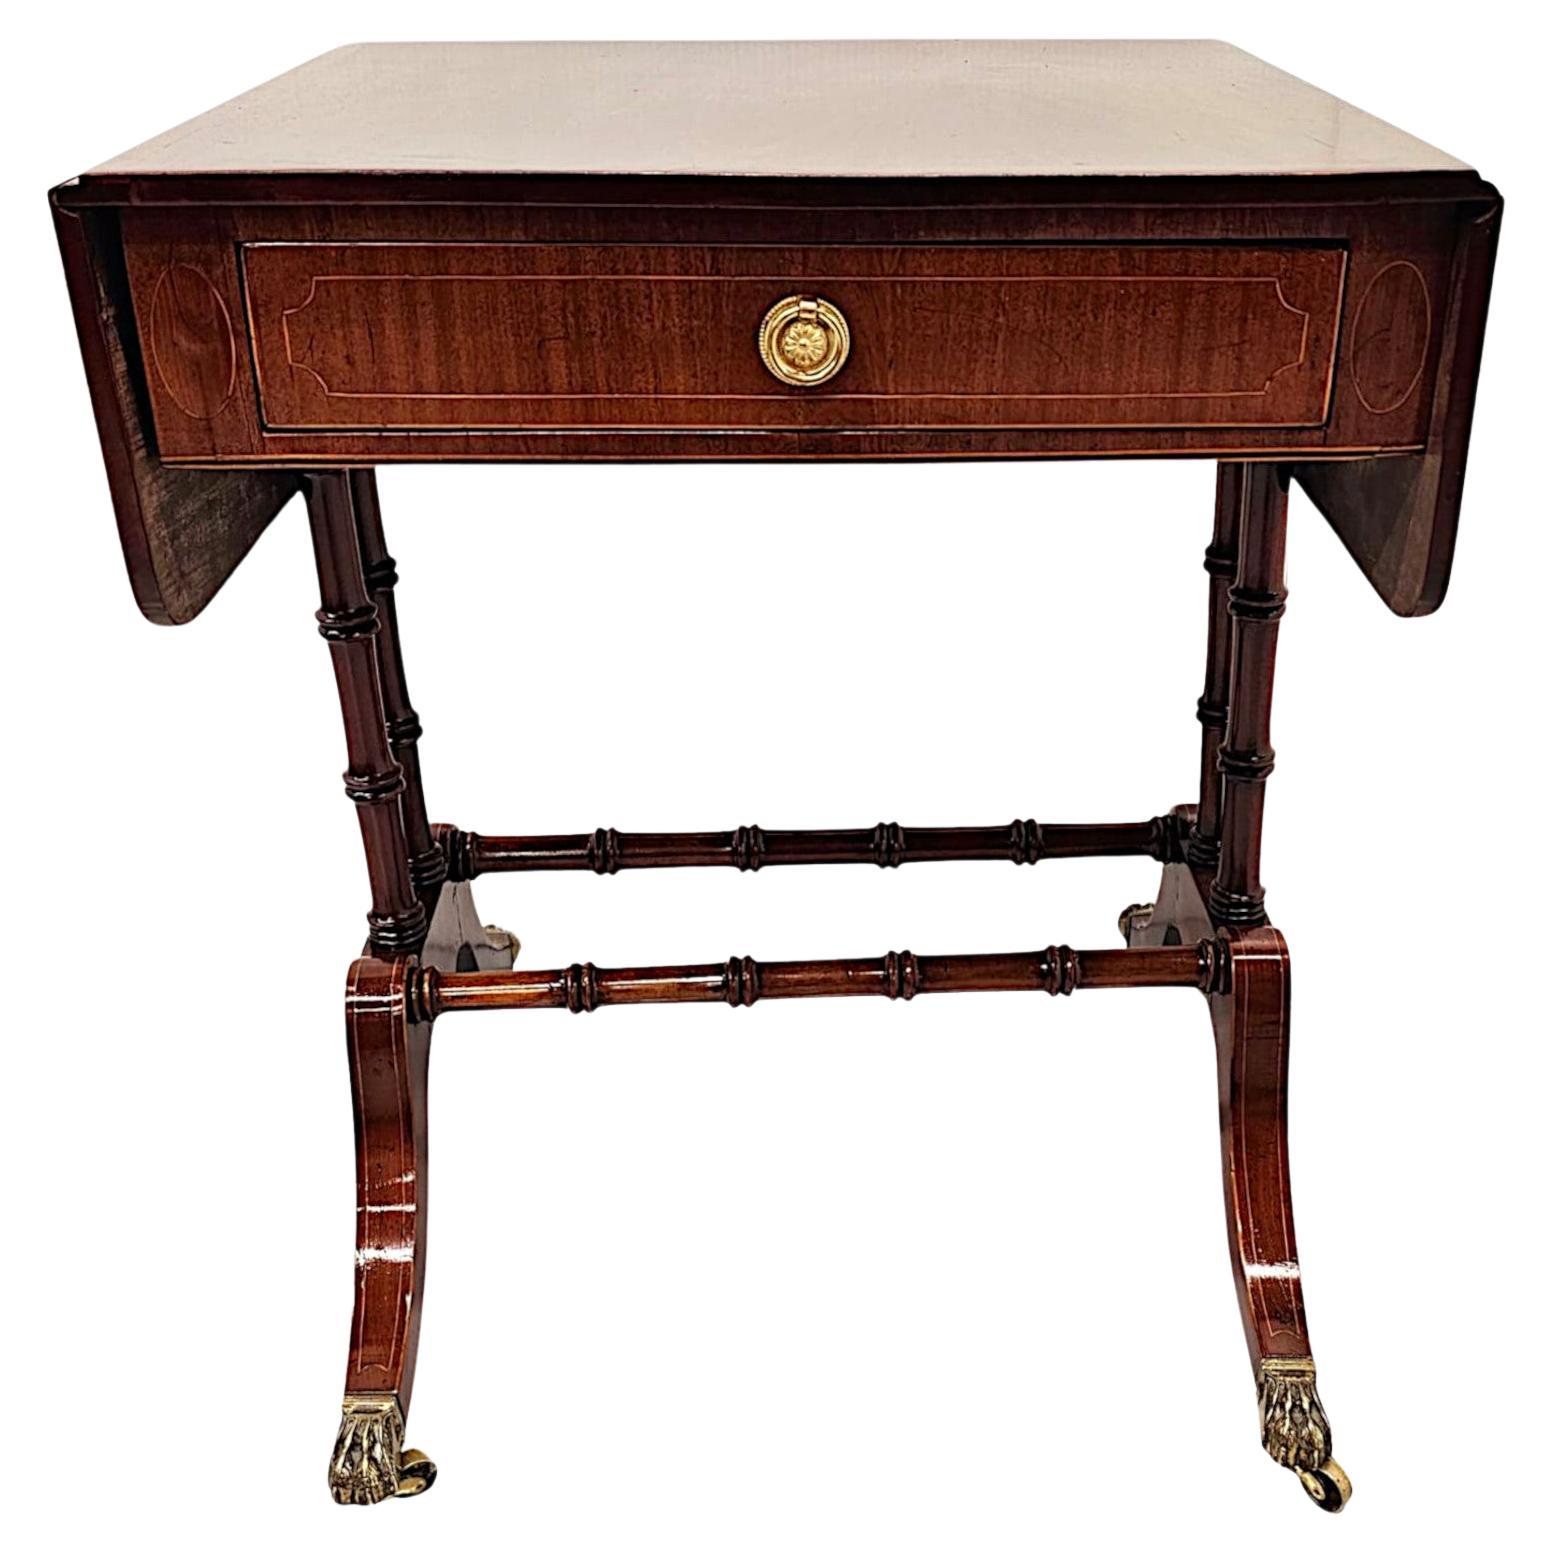  A Fabulous Late 19th Century Inlaid Sofa or Lamp Table For Sale